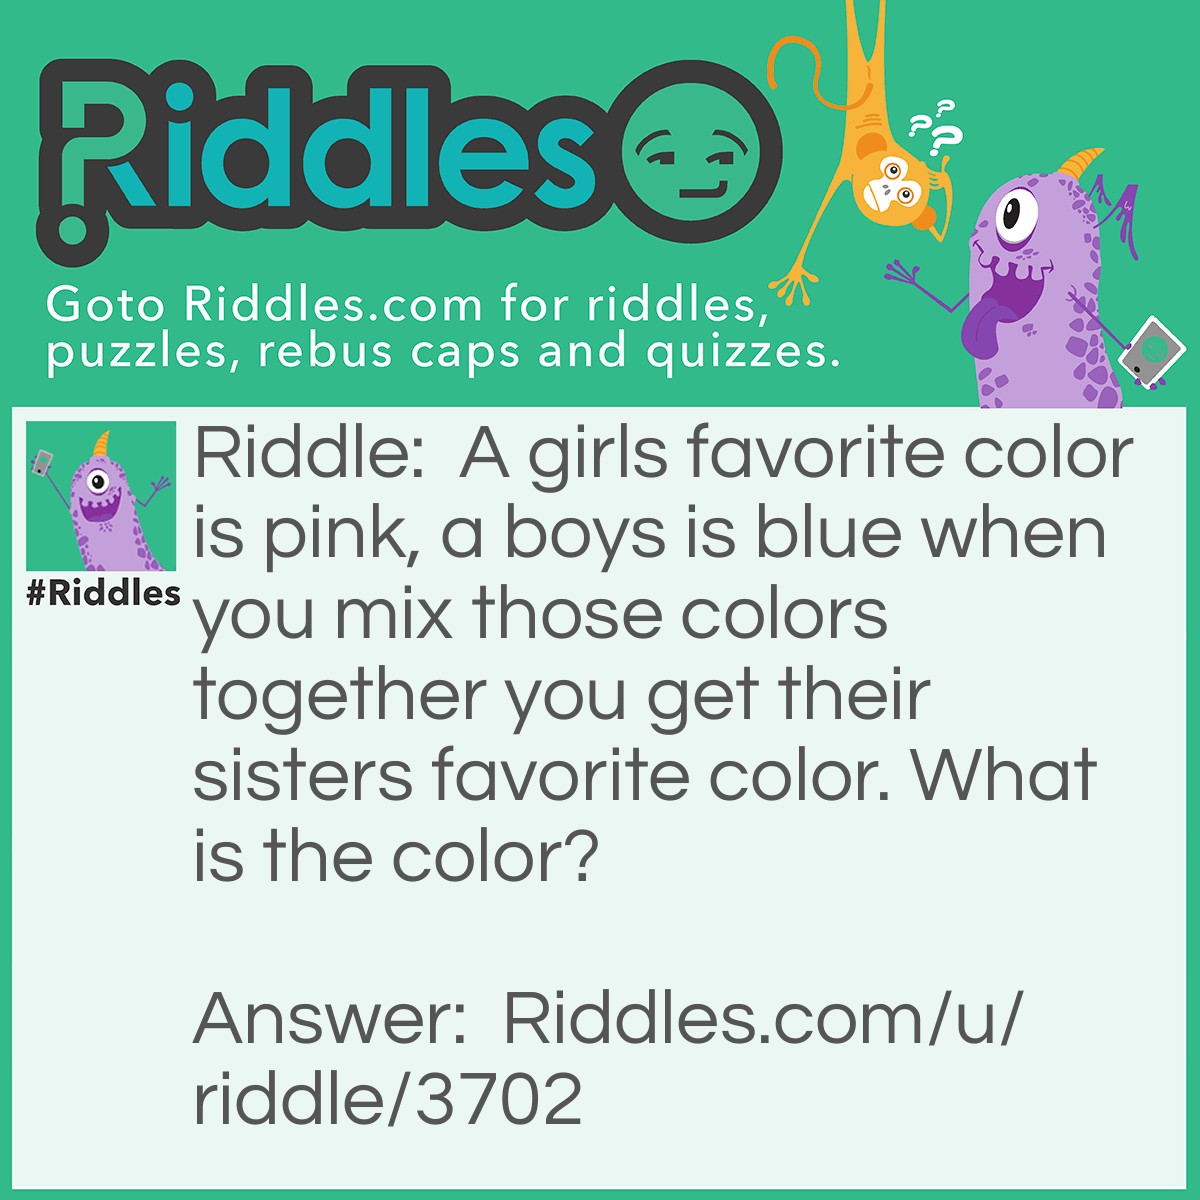 Riddle: A girls favorite color is pink, a boys is blue when you mix those colors together you get their sisters favorite color. What is the color? Answer: Purple.